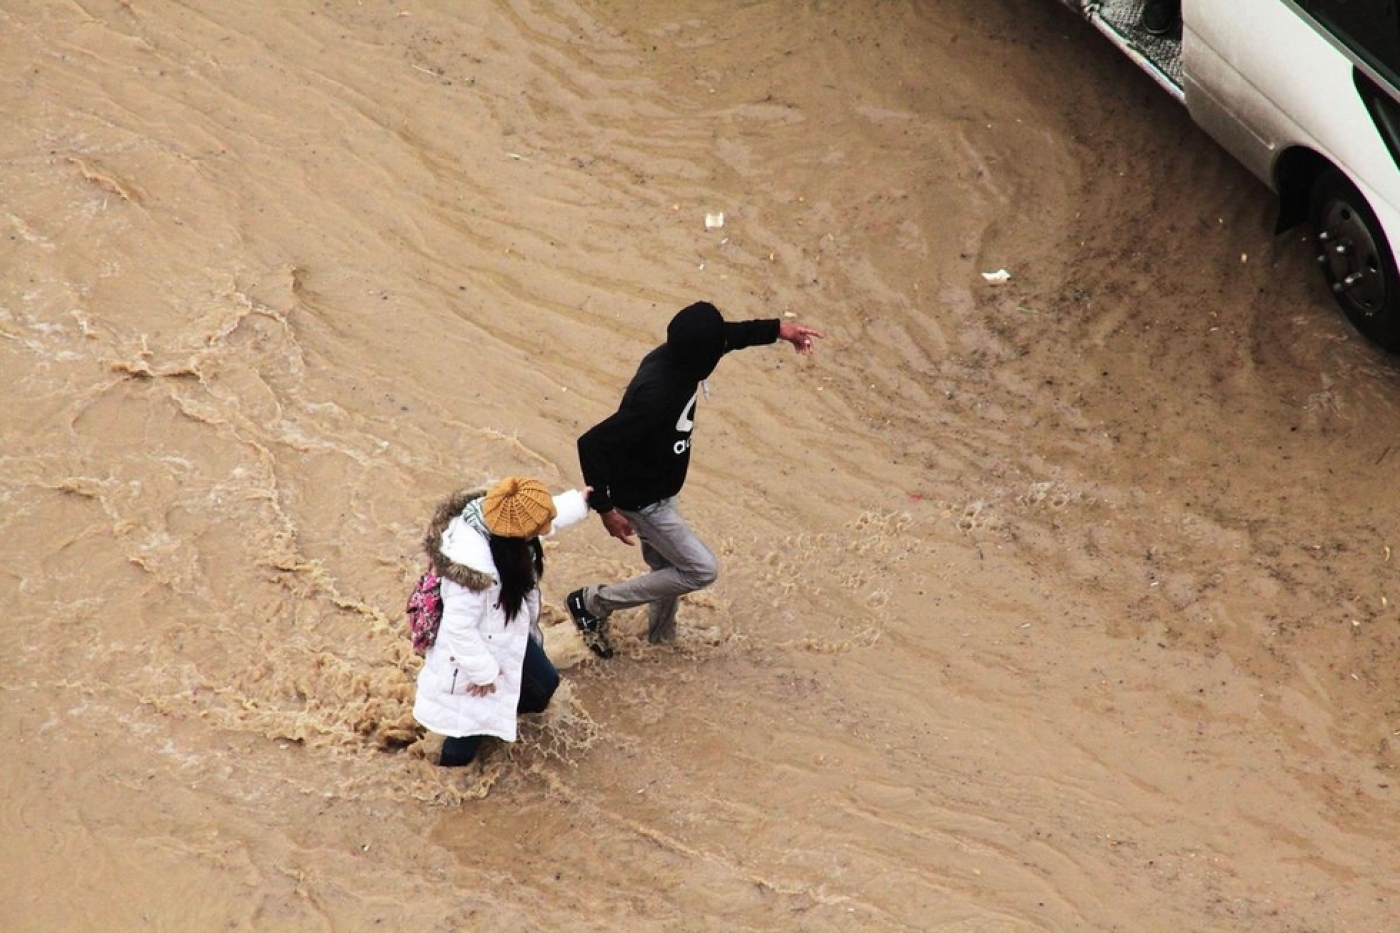 VIDEO: Scramble to save family trapped by flooding Amman | Middle East Eye édition